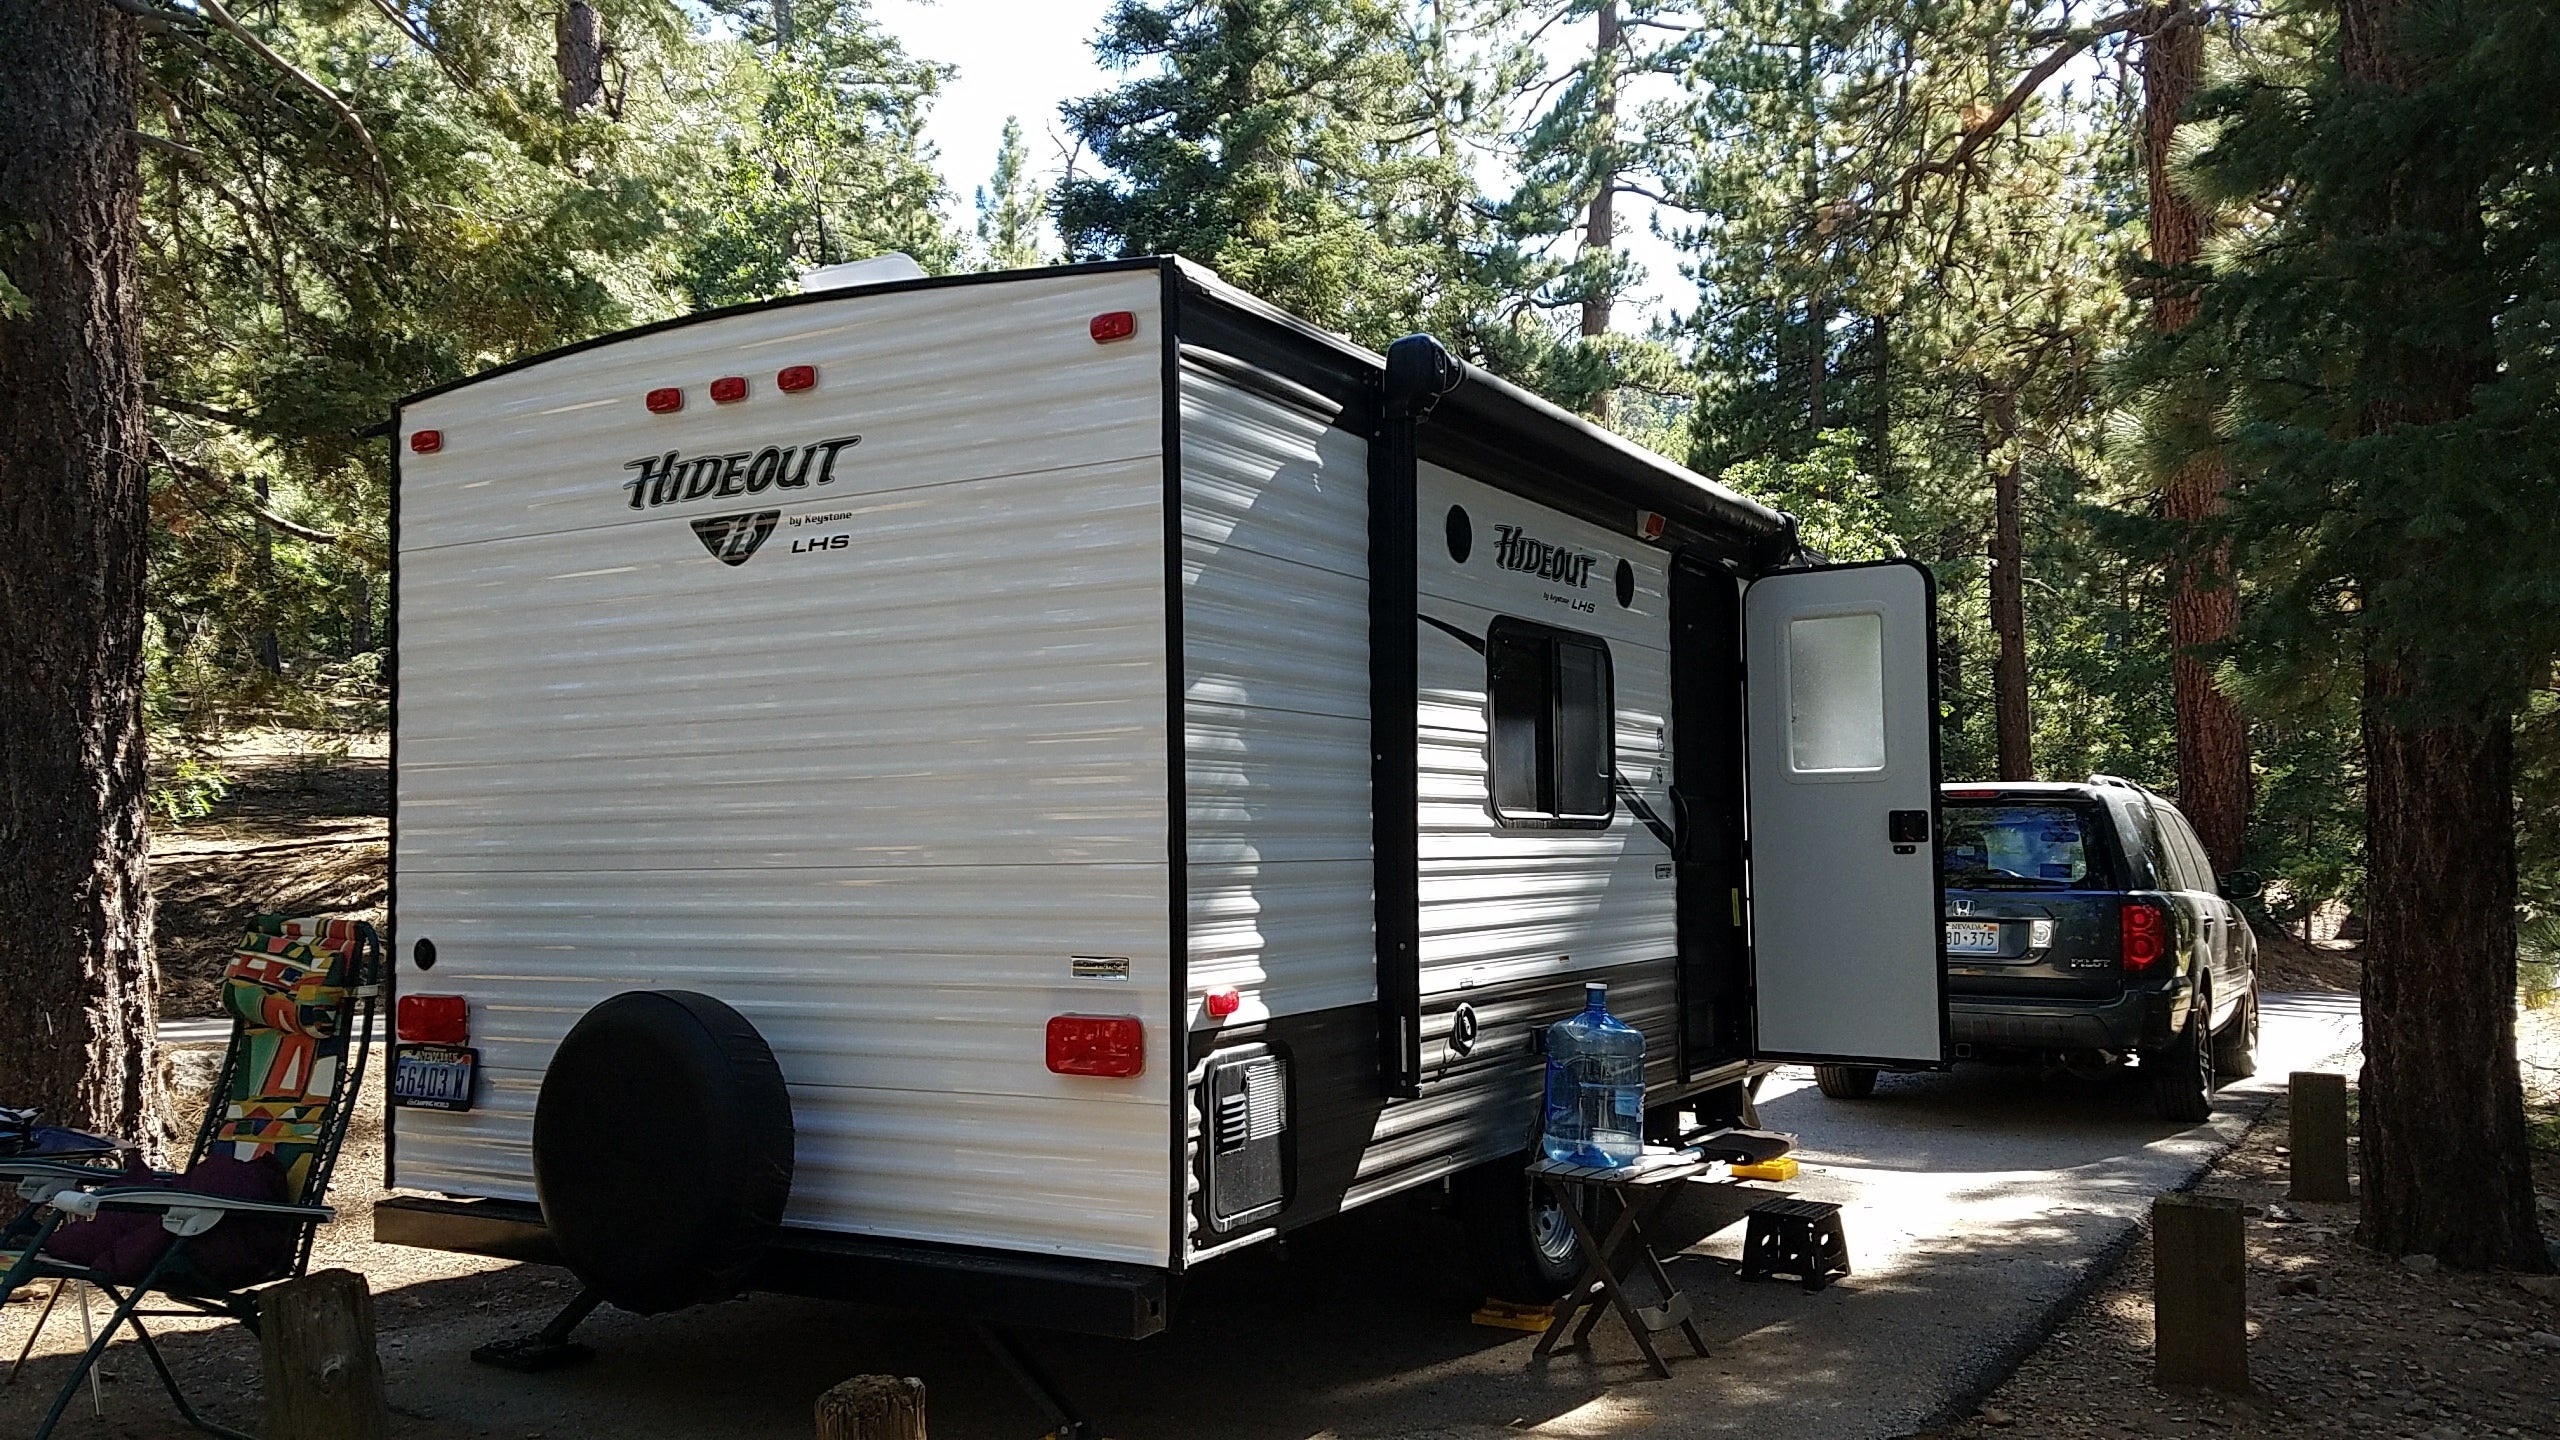 Camper submitted image from Pineknot - 1